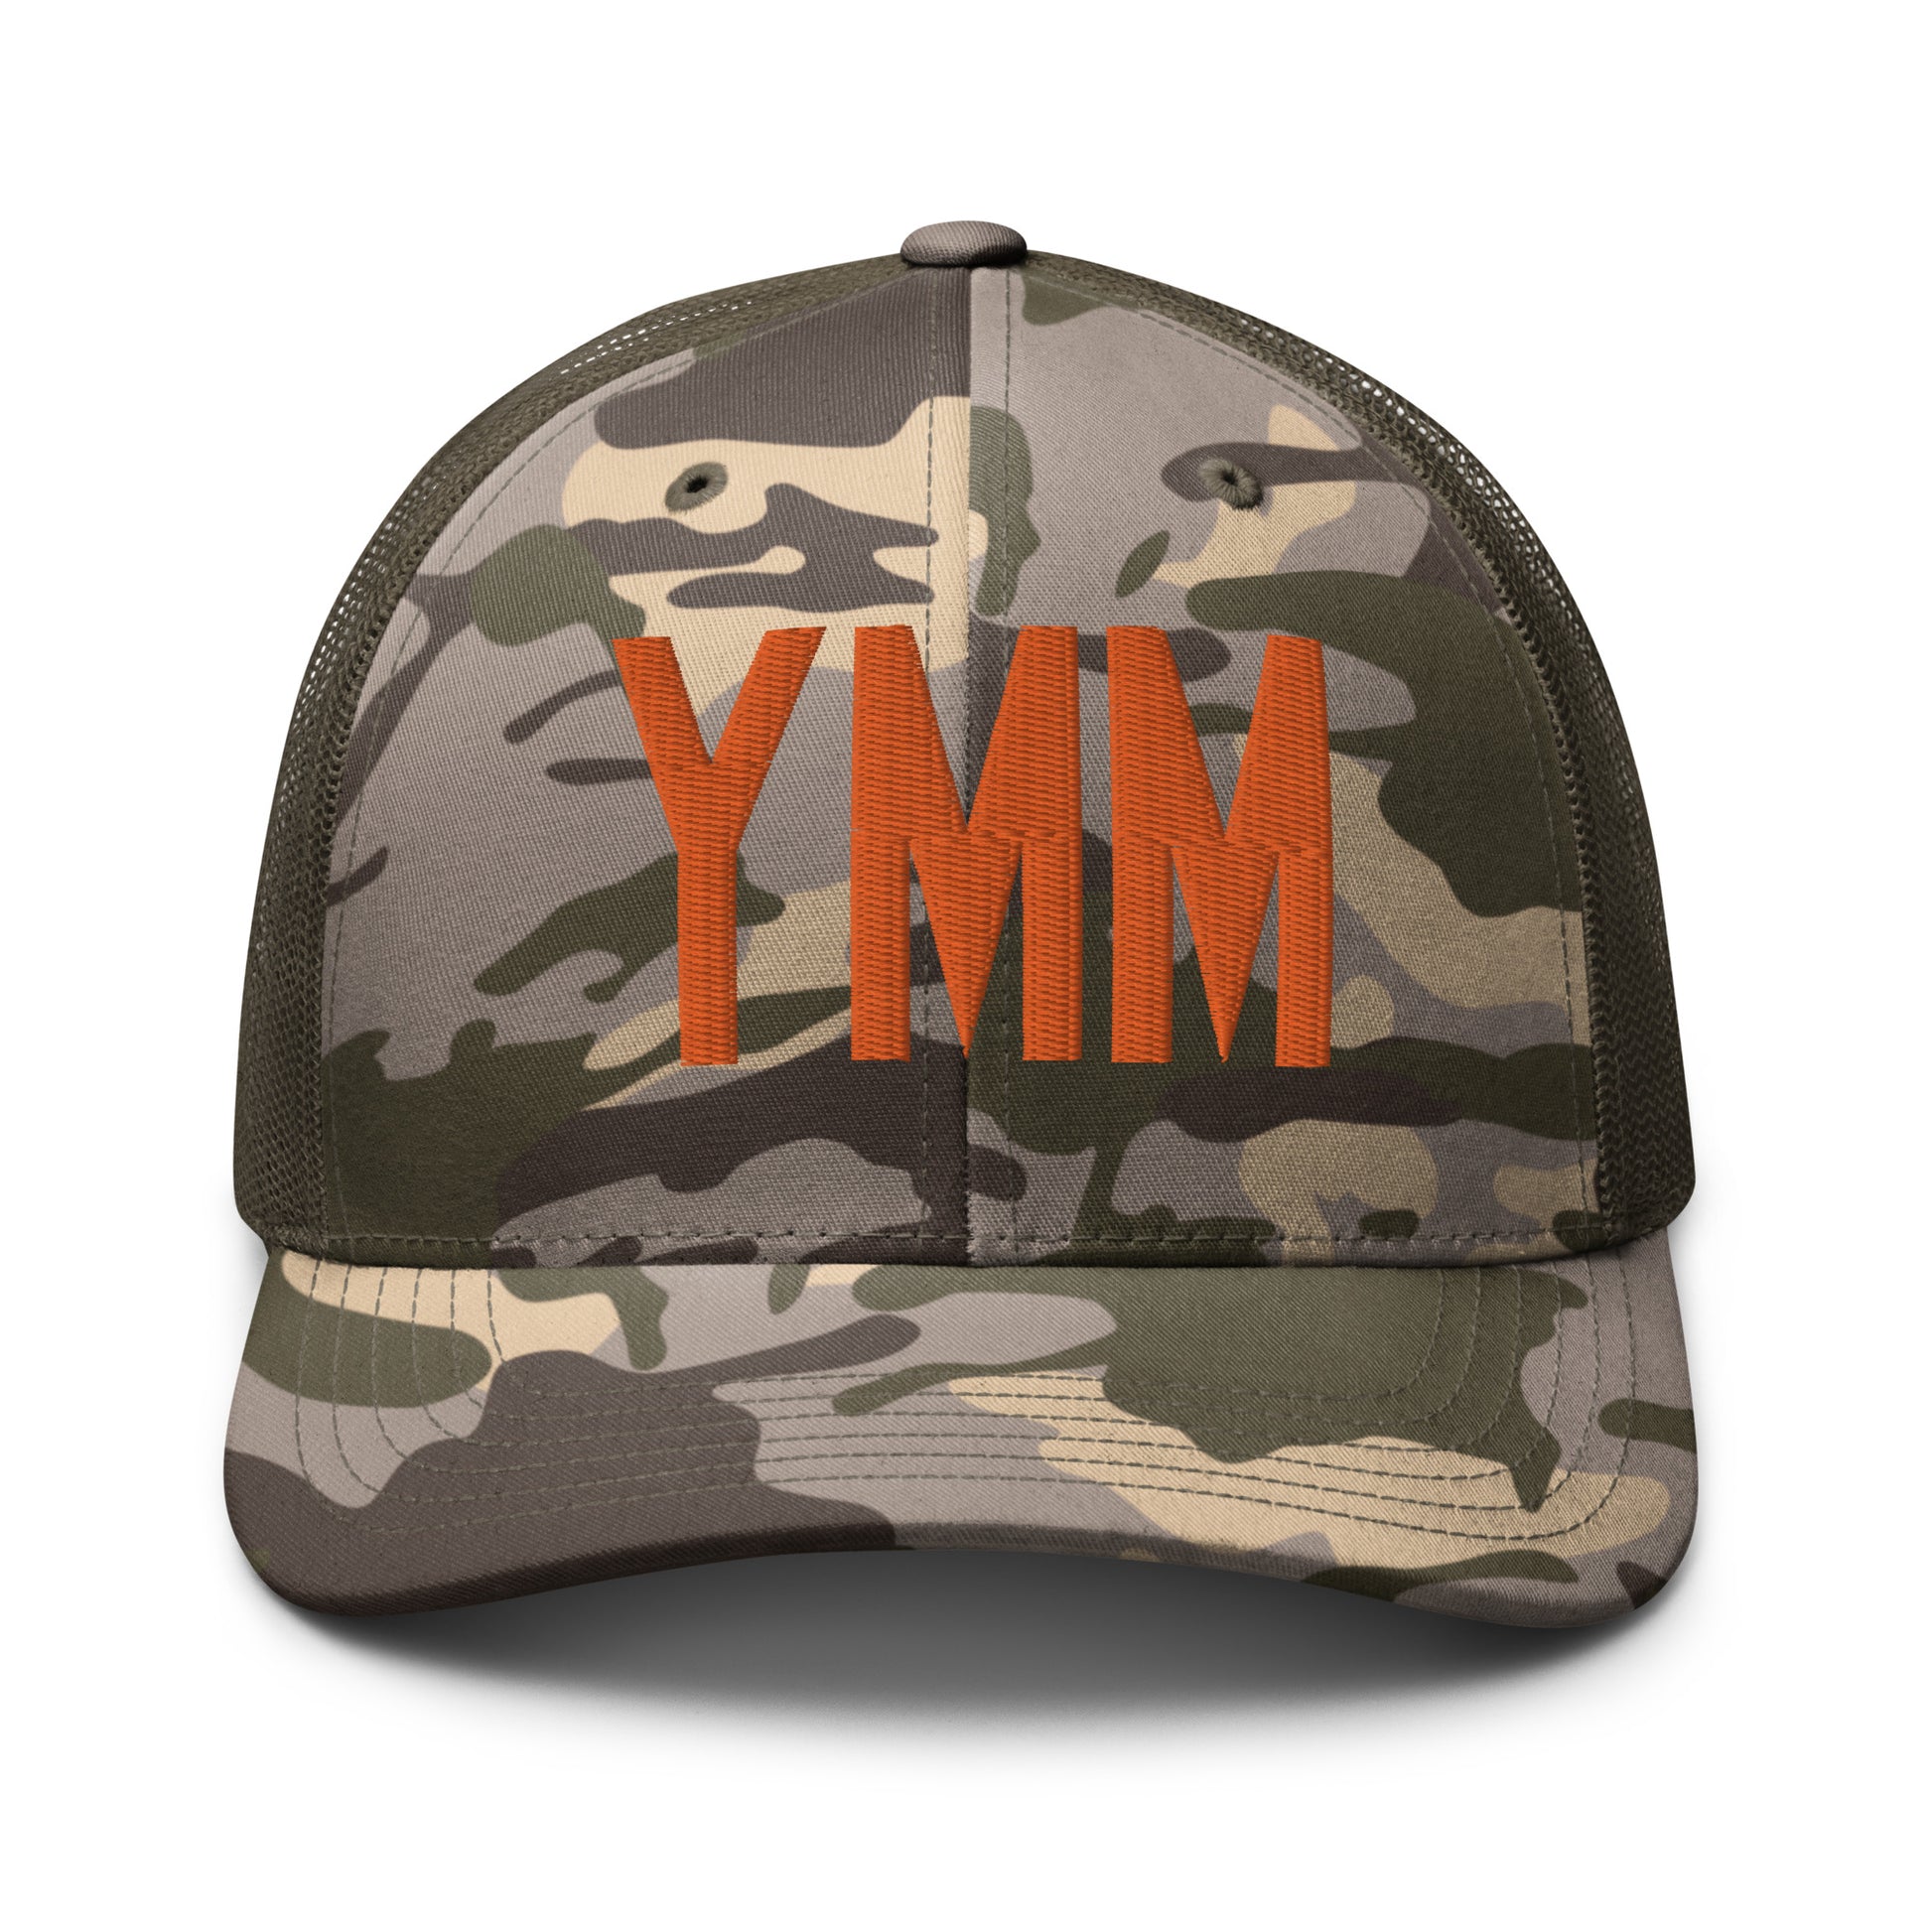 Airport Code Camouflage Trucker Hat - Orange • YMM Fort McMurray • YHM Designs - Image 17